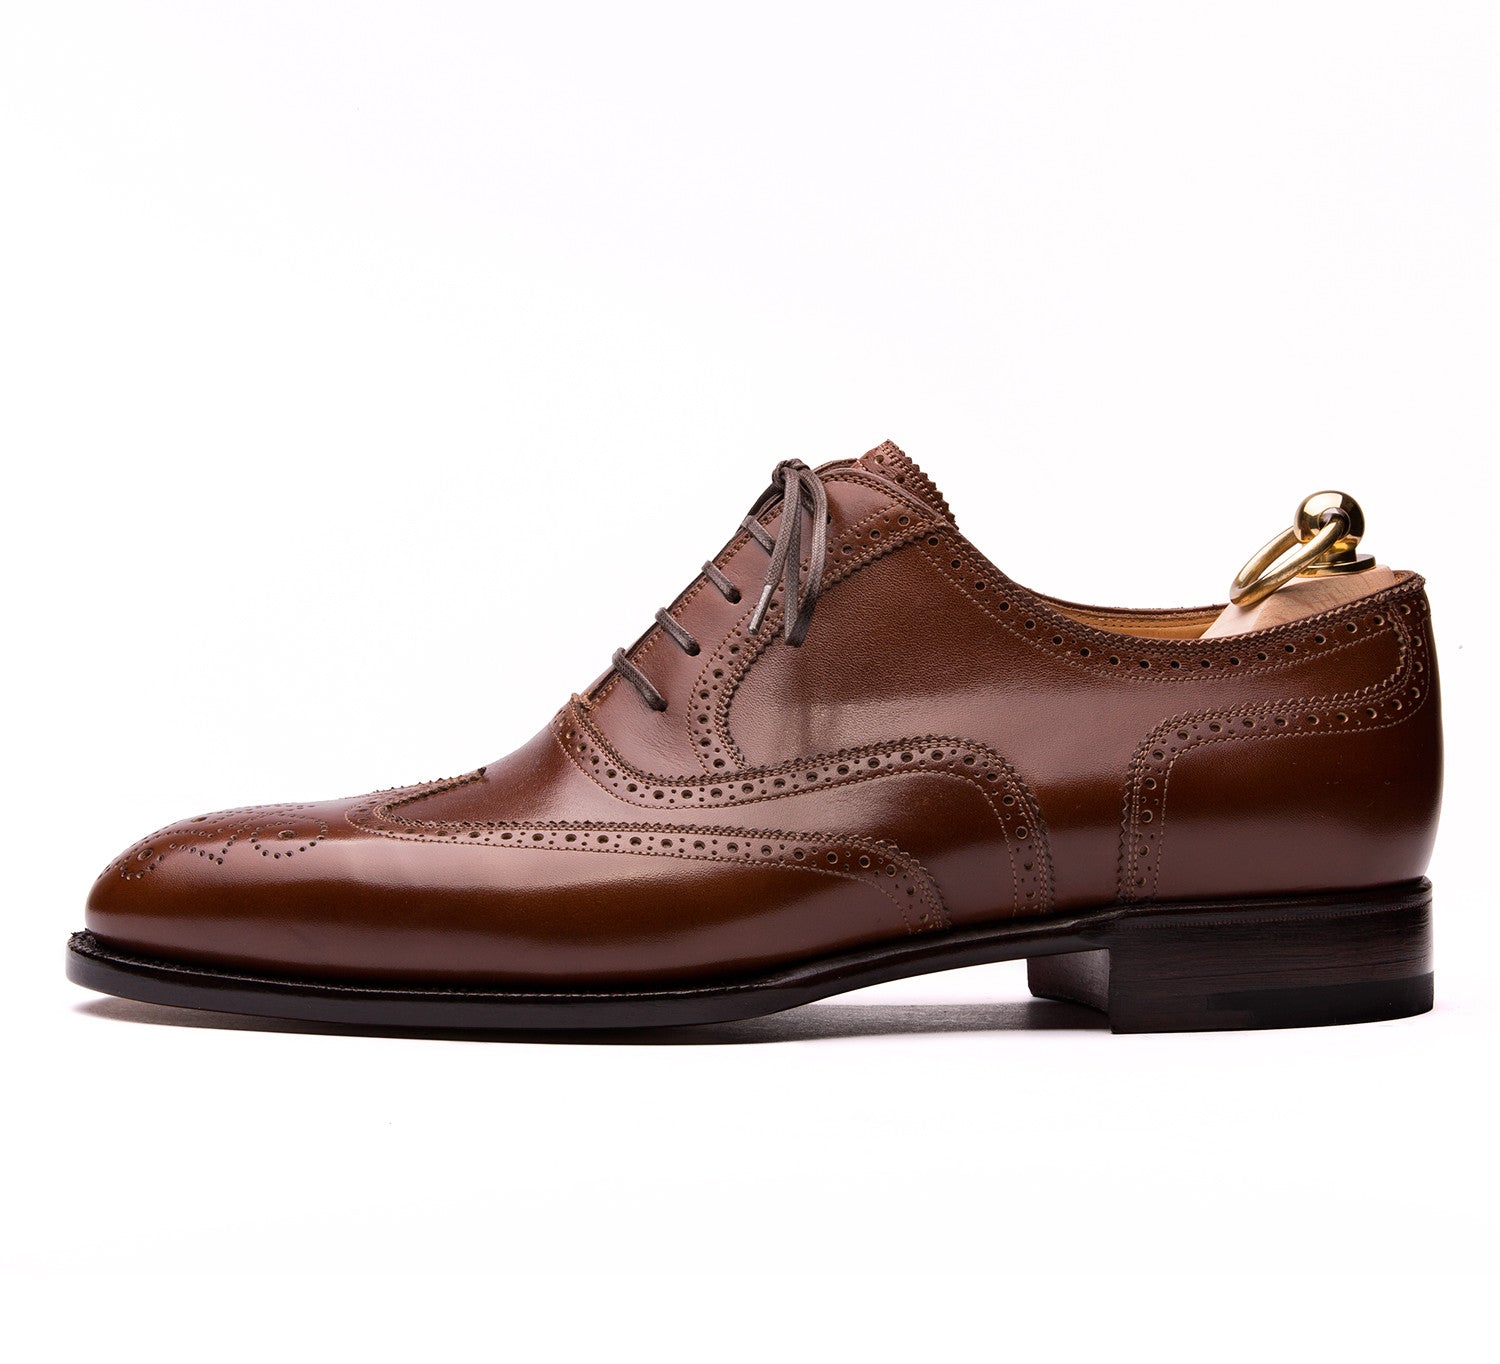 Stefano Bemer Style 6240 - Brown Calf - Side View